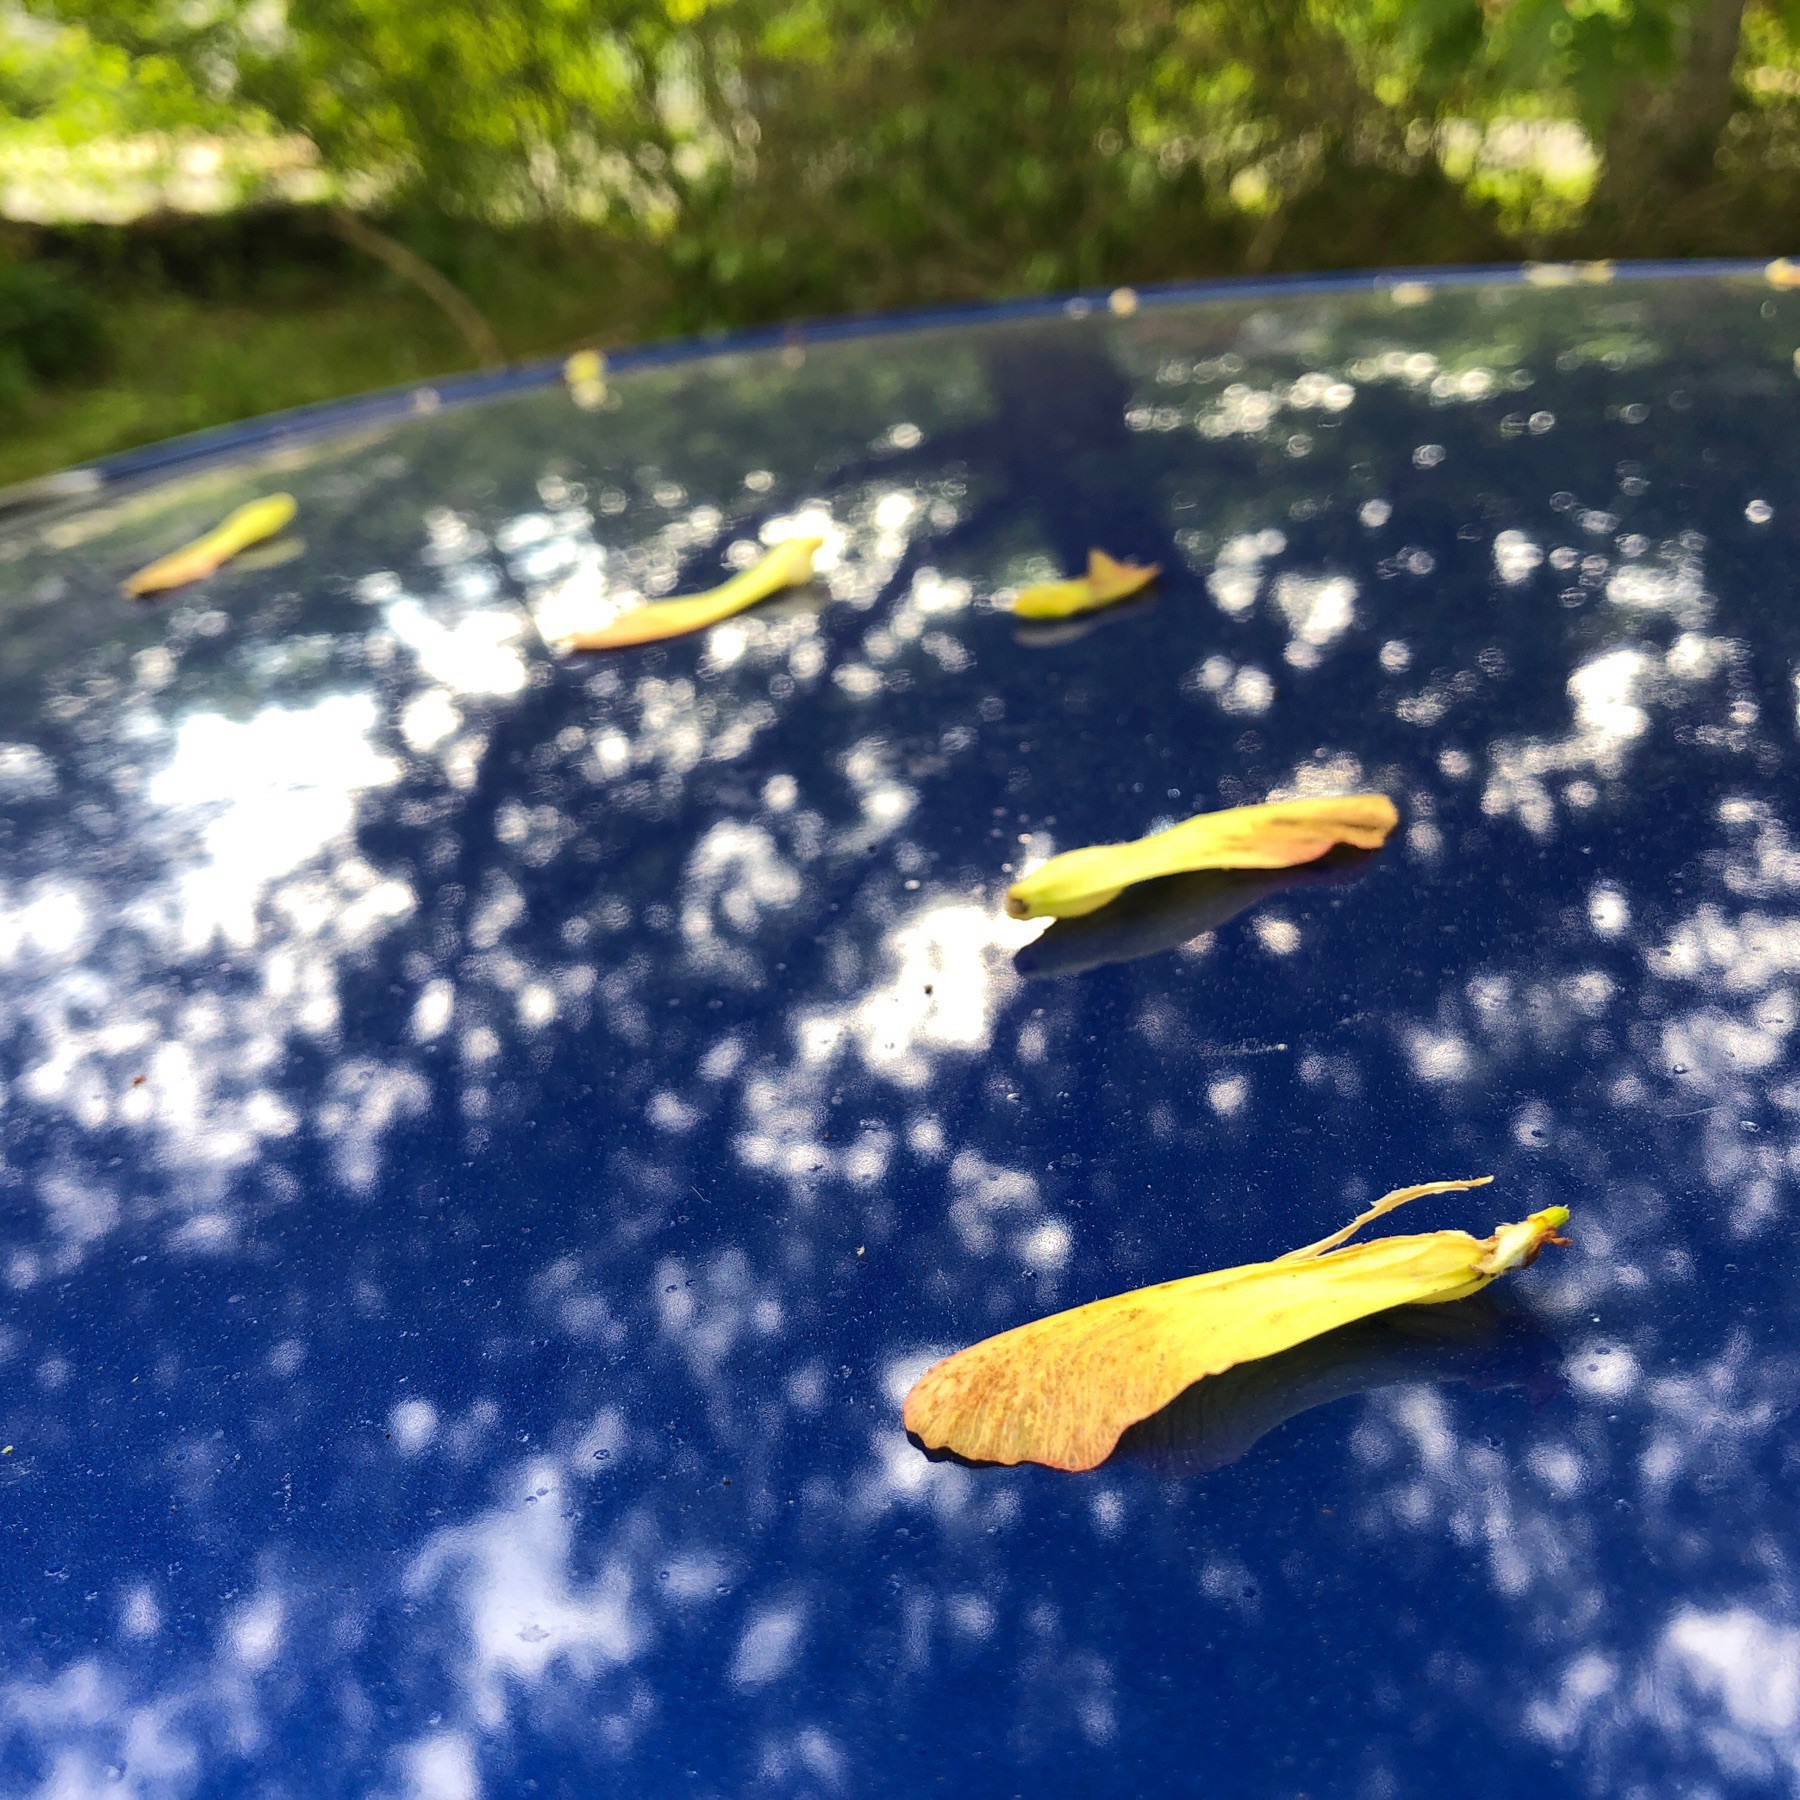 Seeds on car roof.